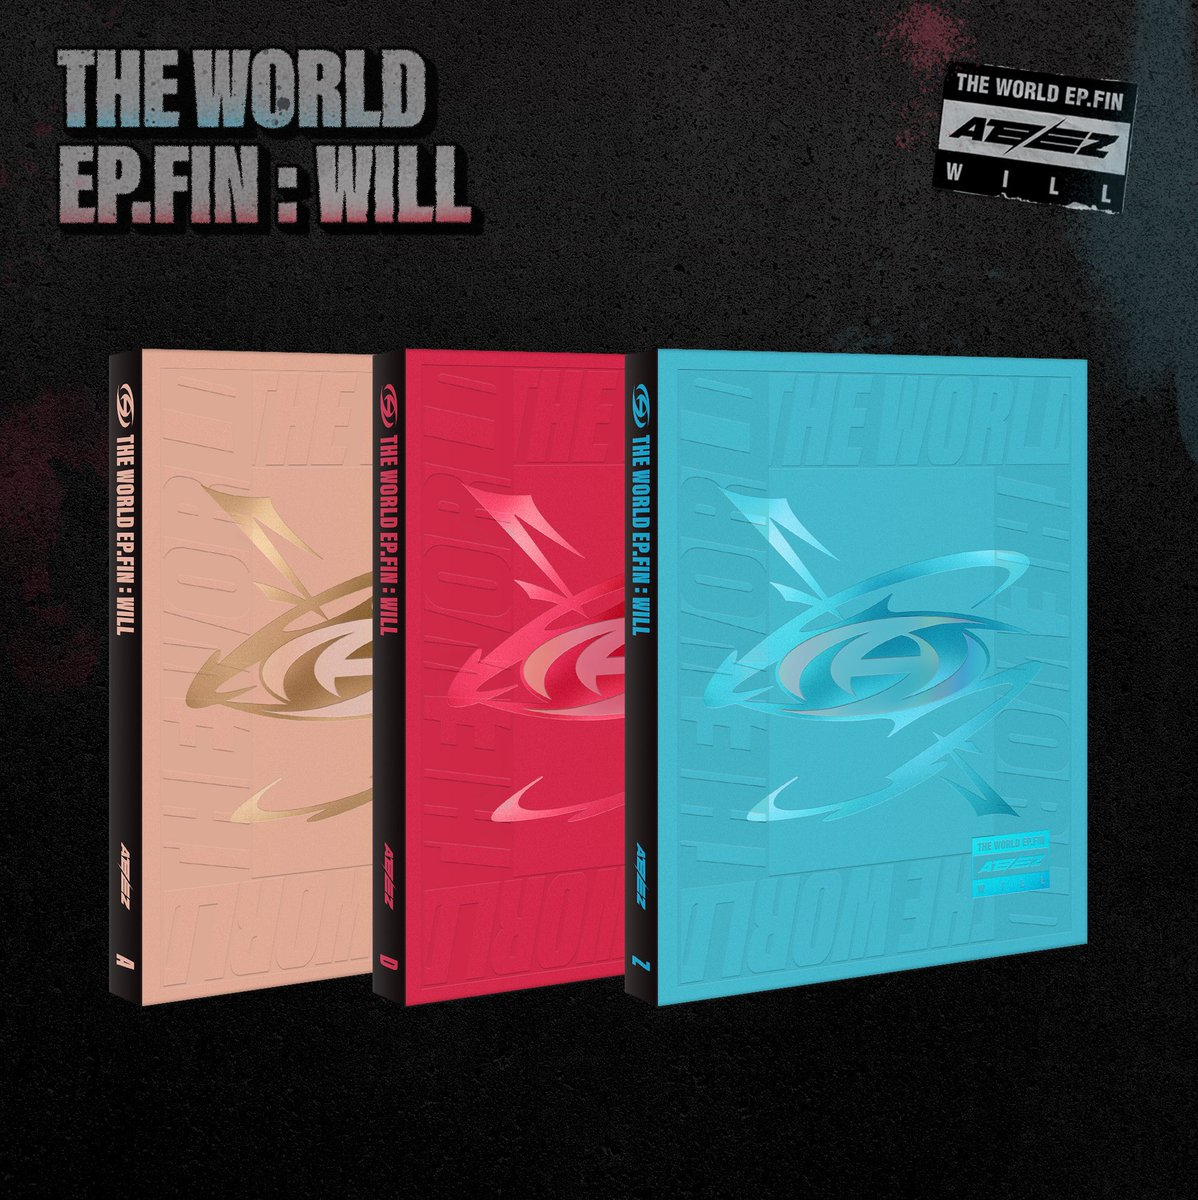 ATEEZ – The World Ep. Fin : Will